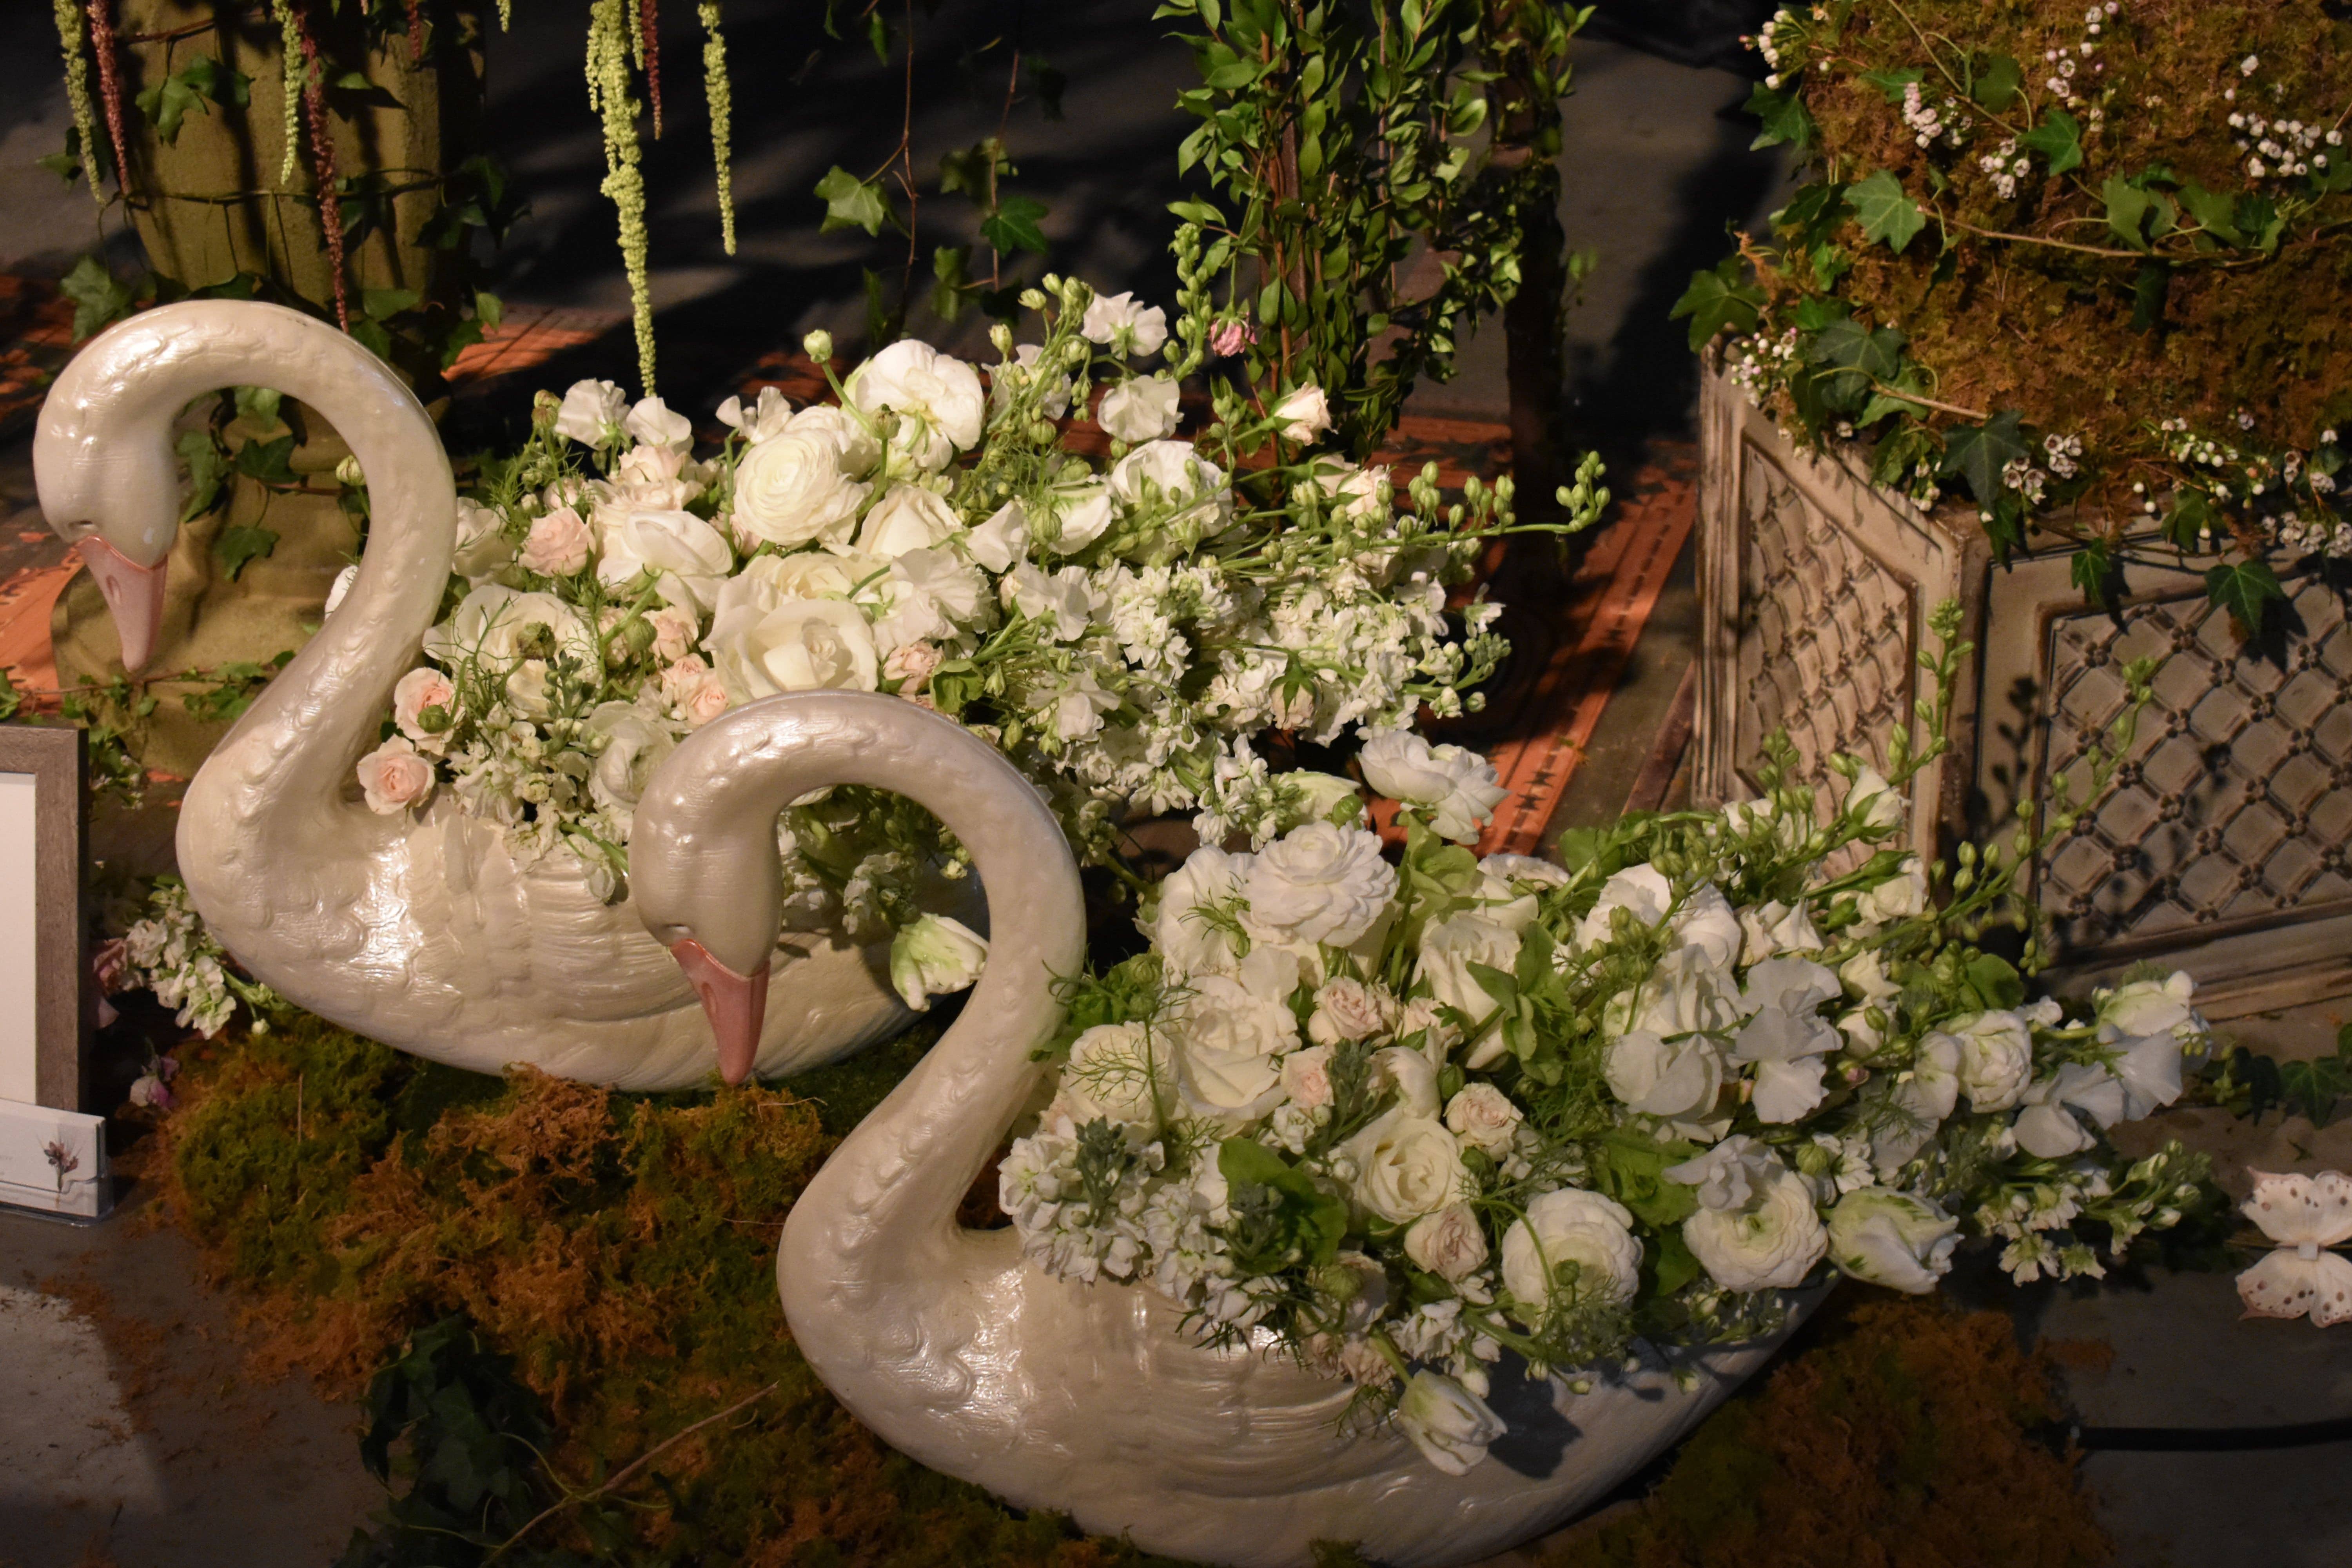 Swan planters with white flowers floral design